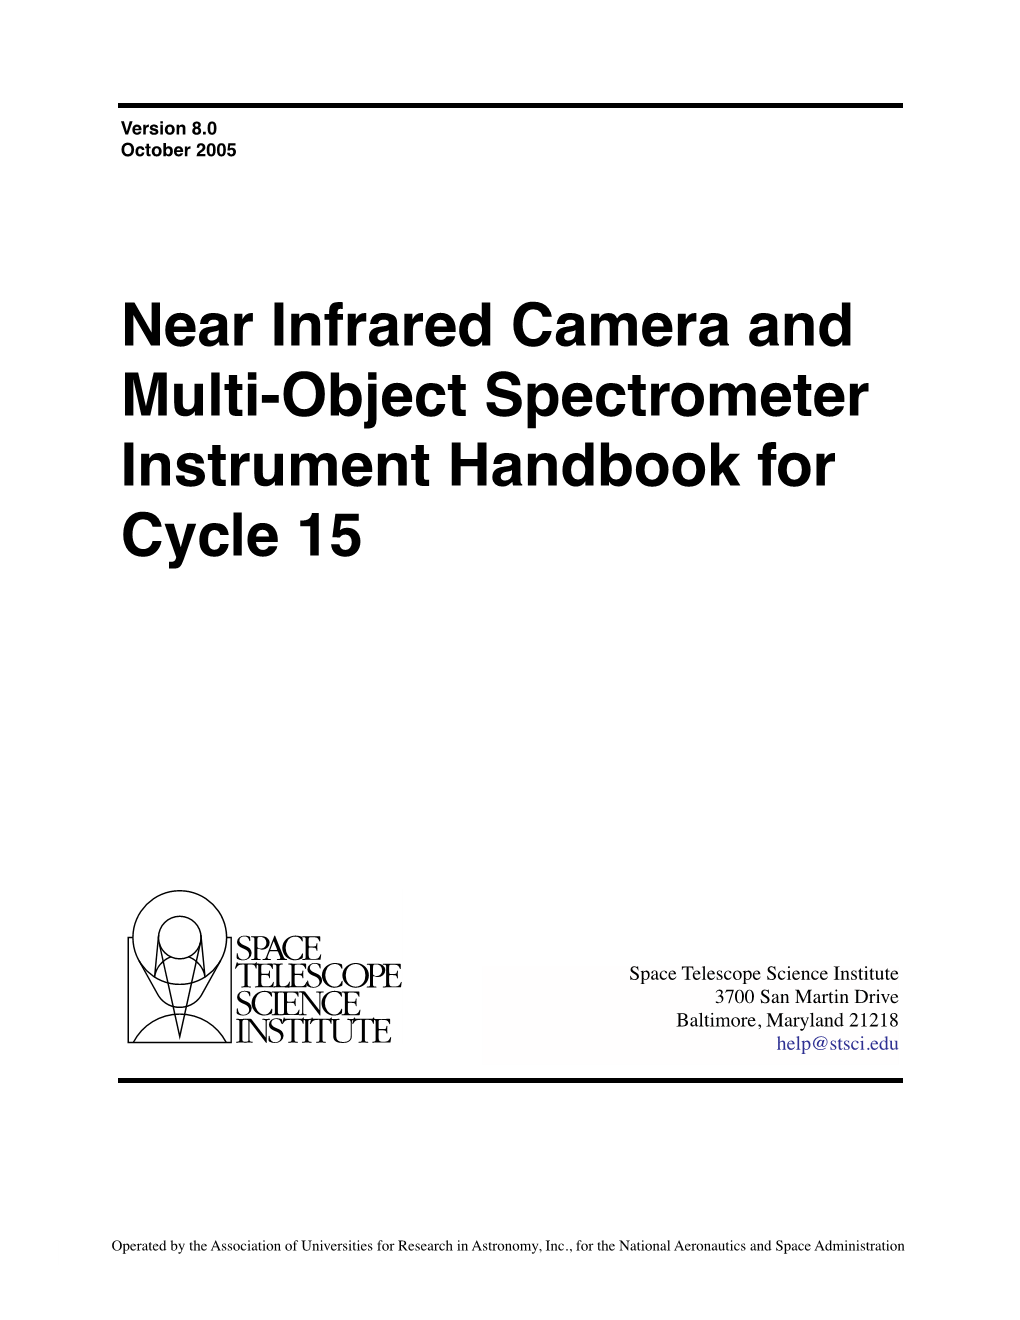 Near Infrared Camera and Multi-Object Spectrometer Instrument Handbook for Cycle 15